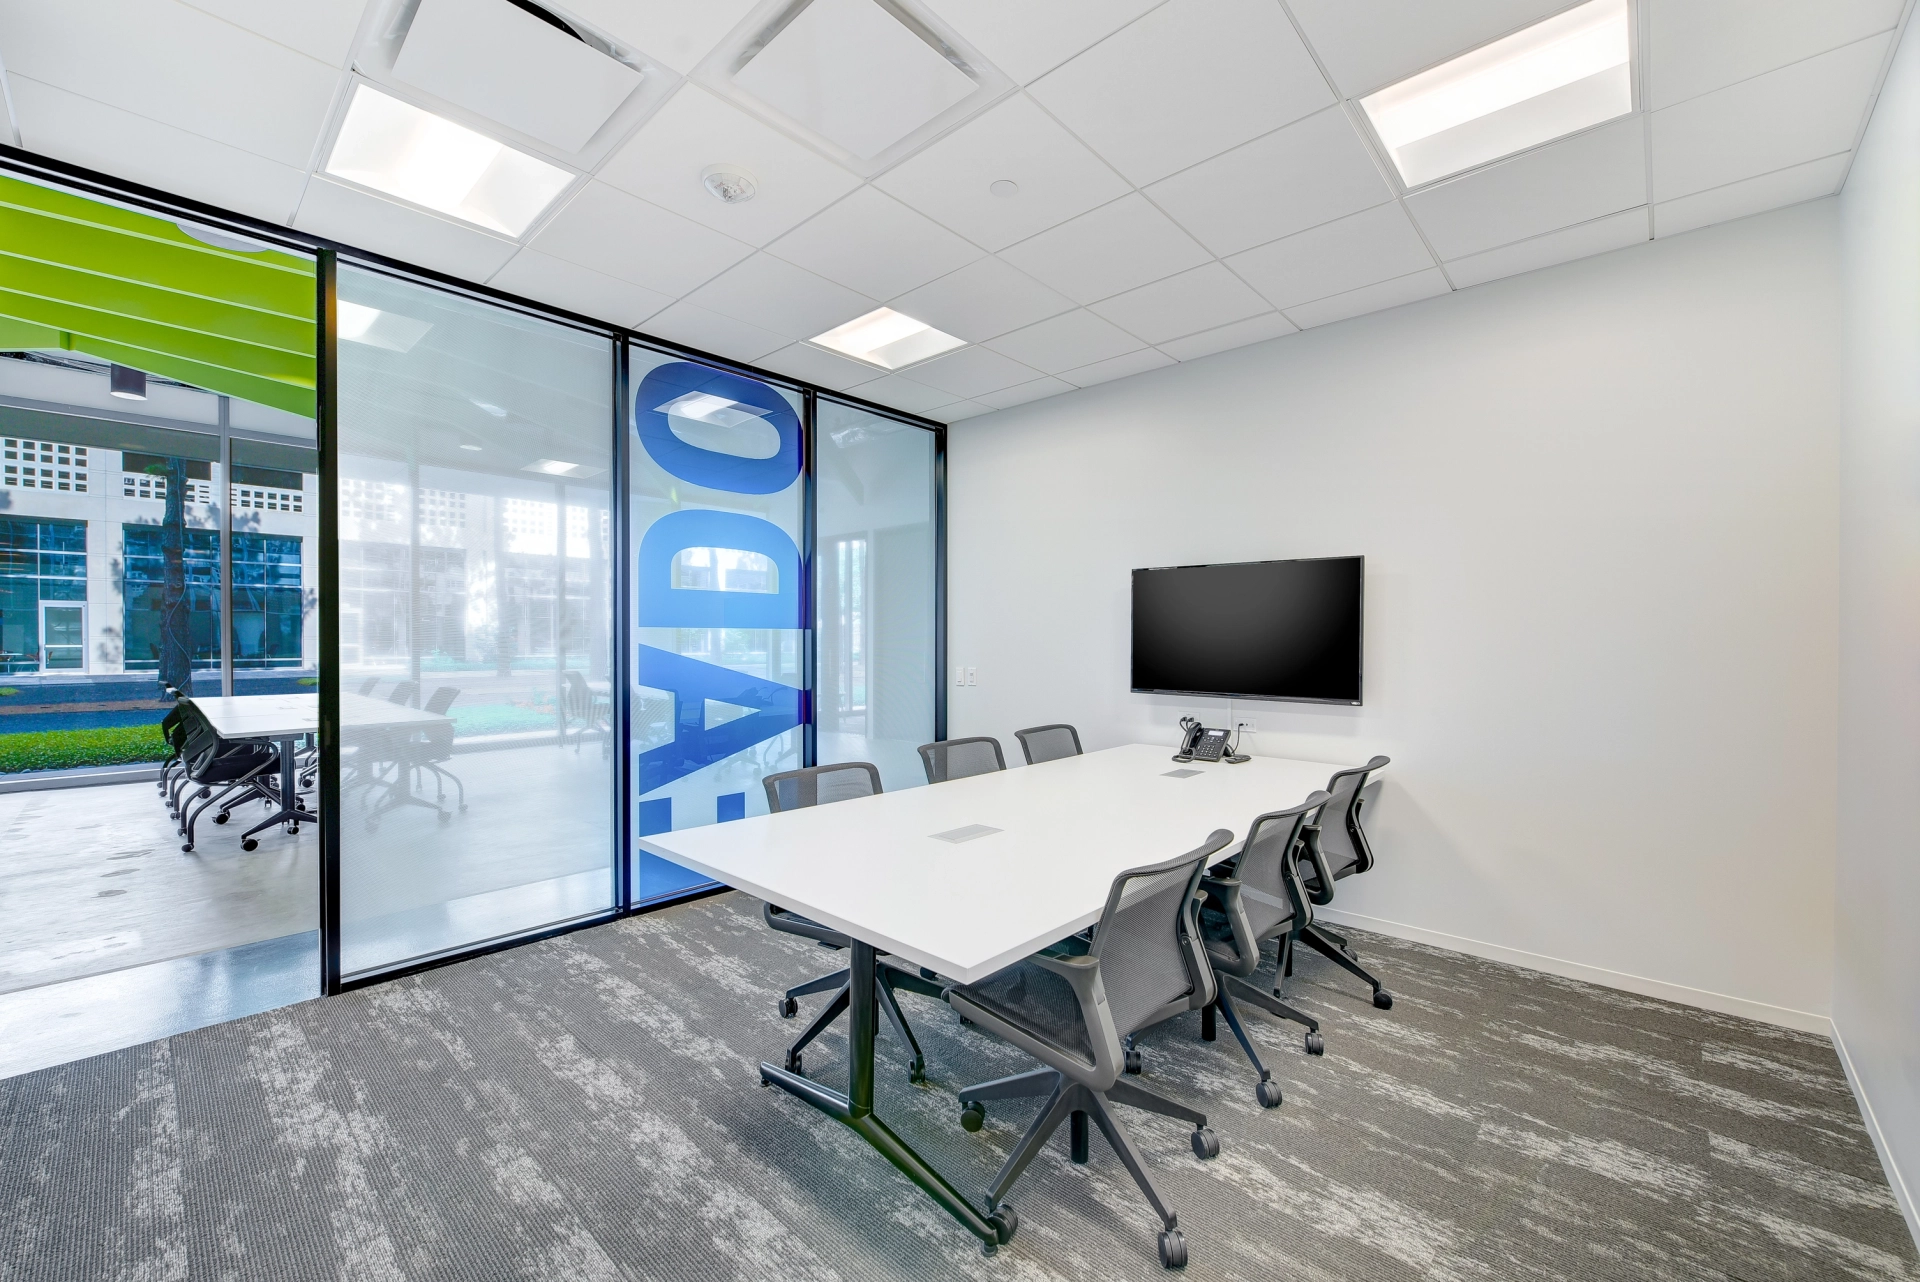 An office meeting room with glass walls and chairs.